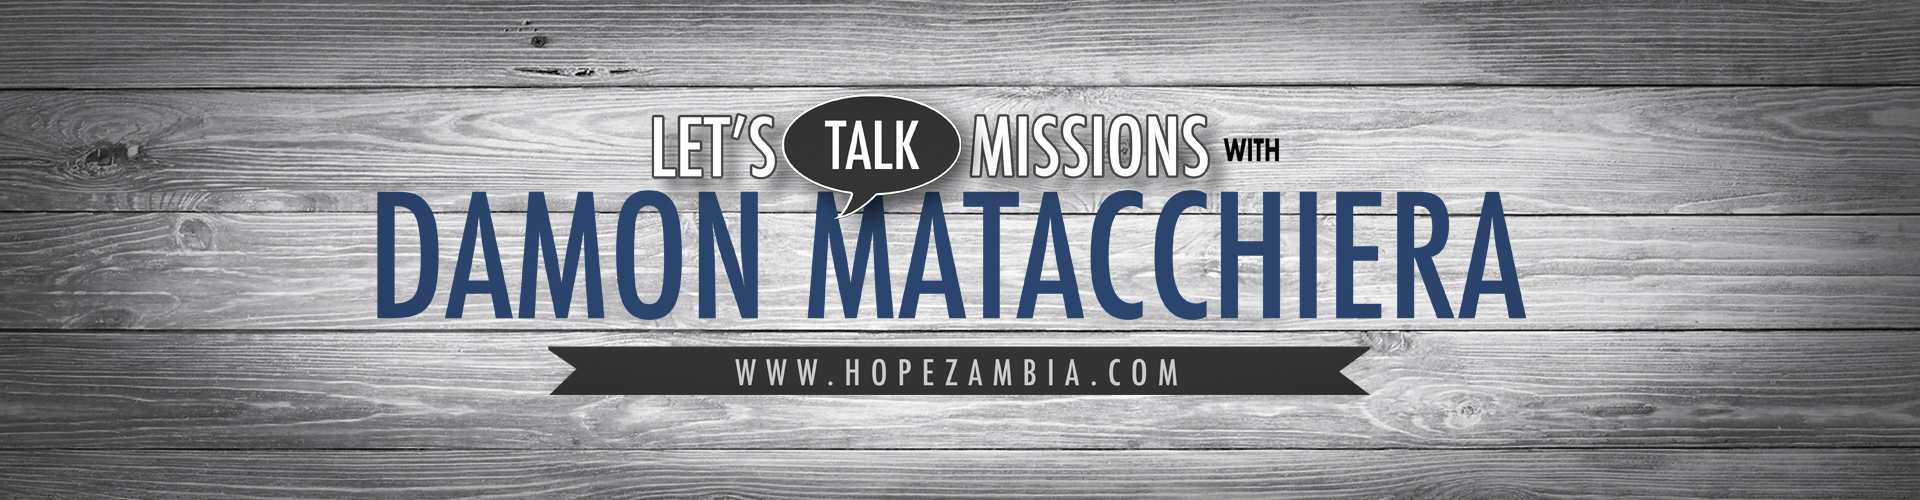 Let’s Talk Missions